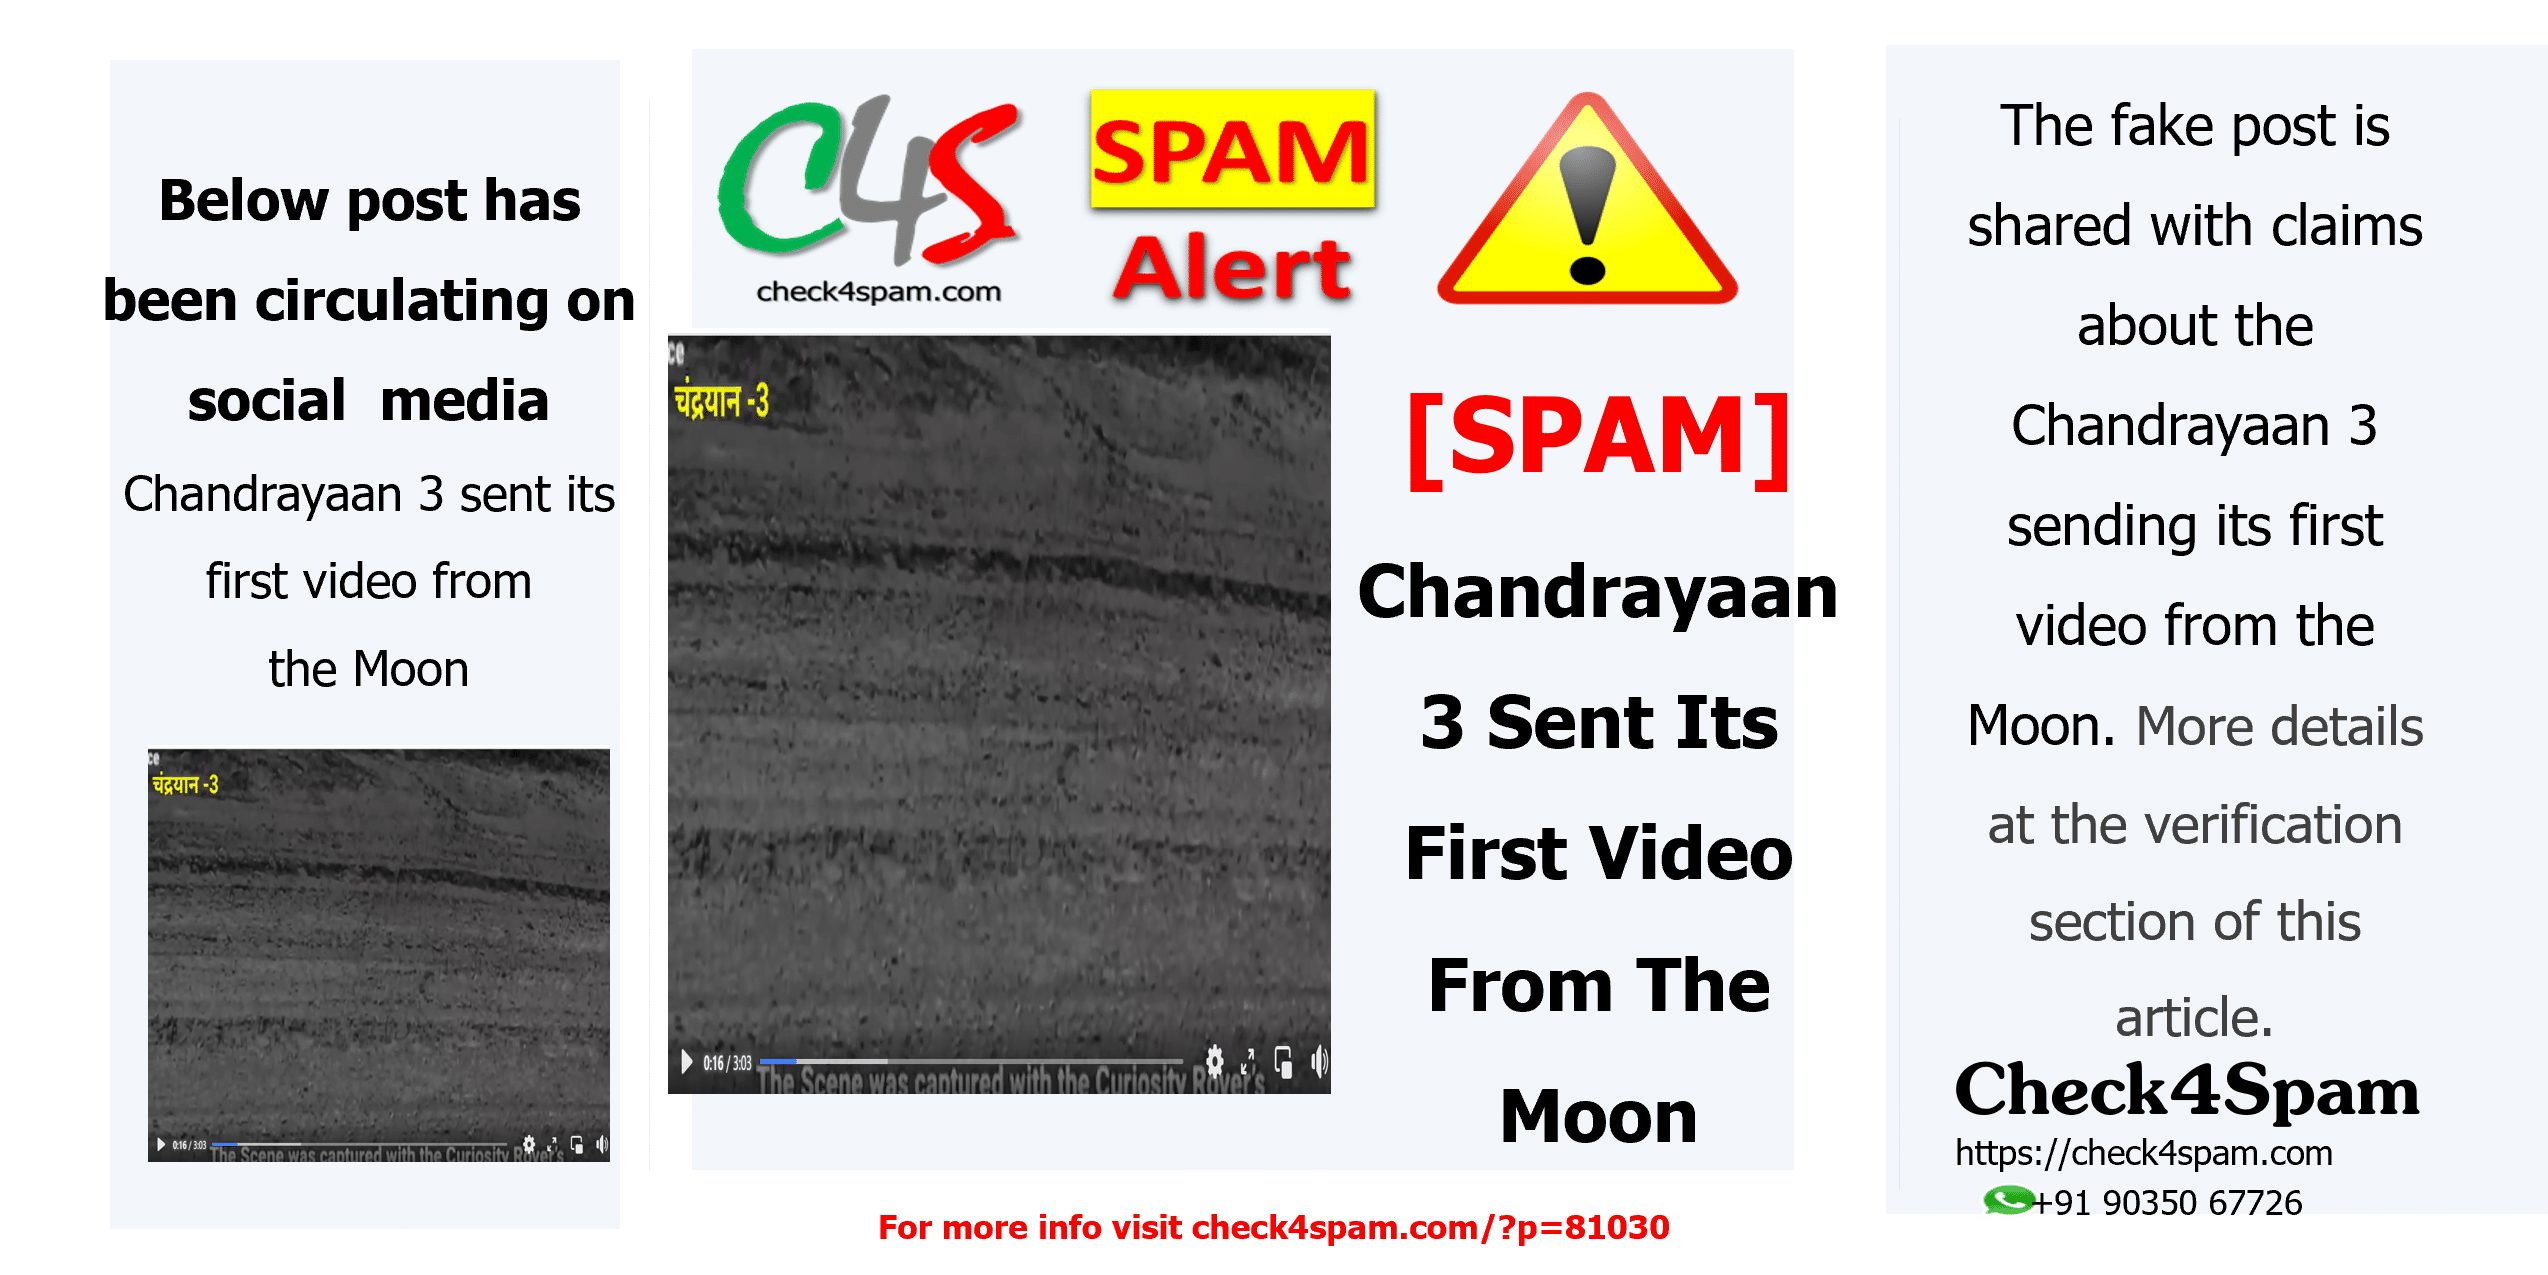 Chandraayan 3 Sent Its First Video From The Moon